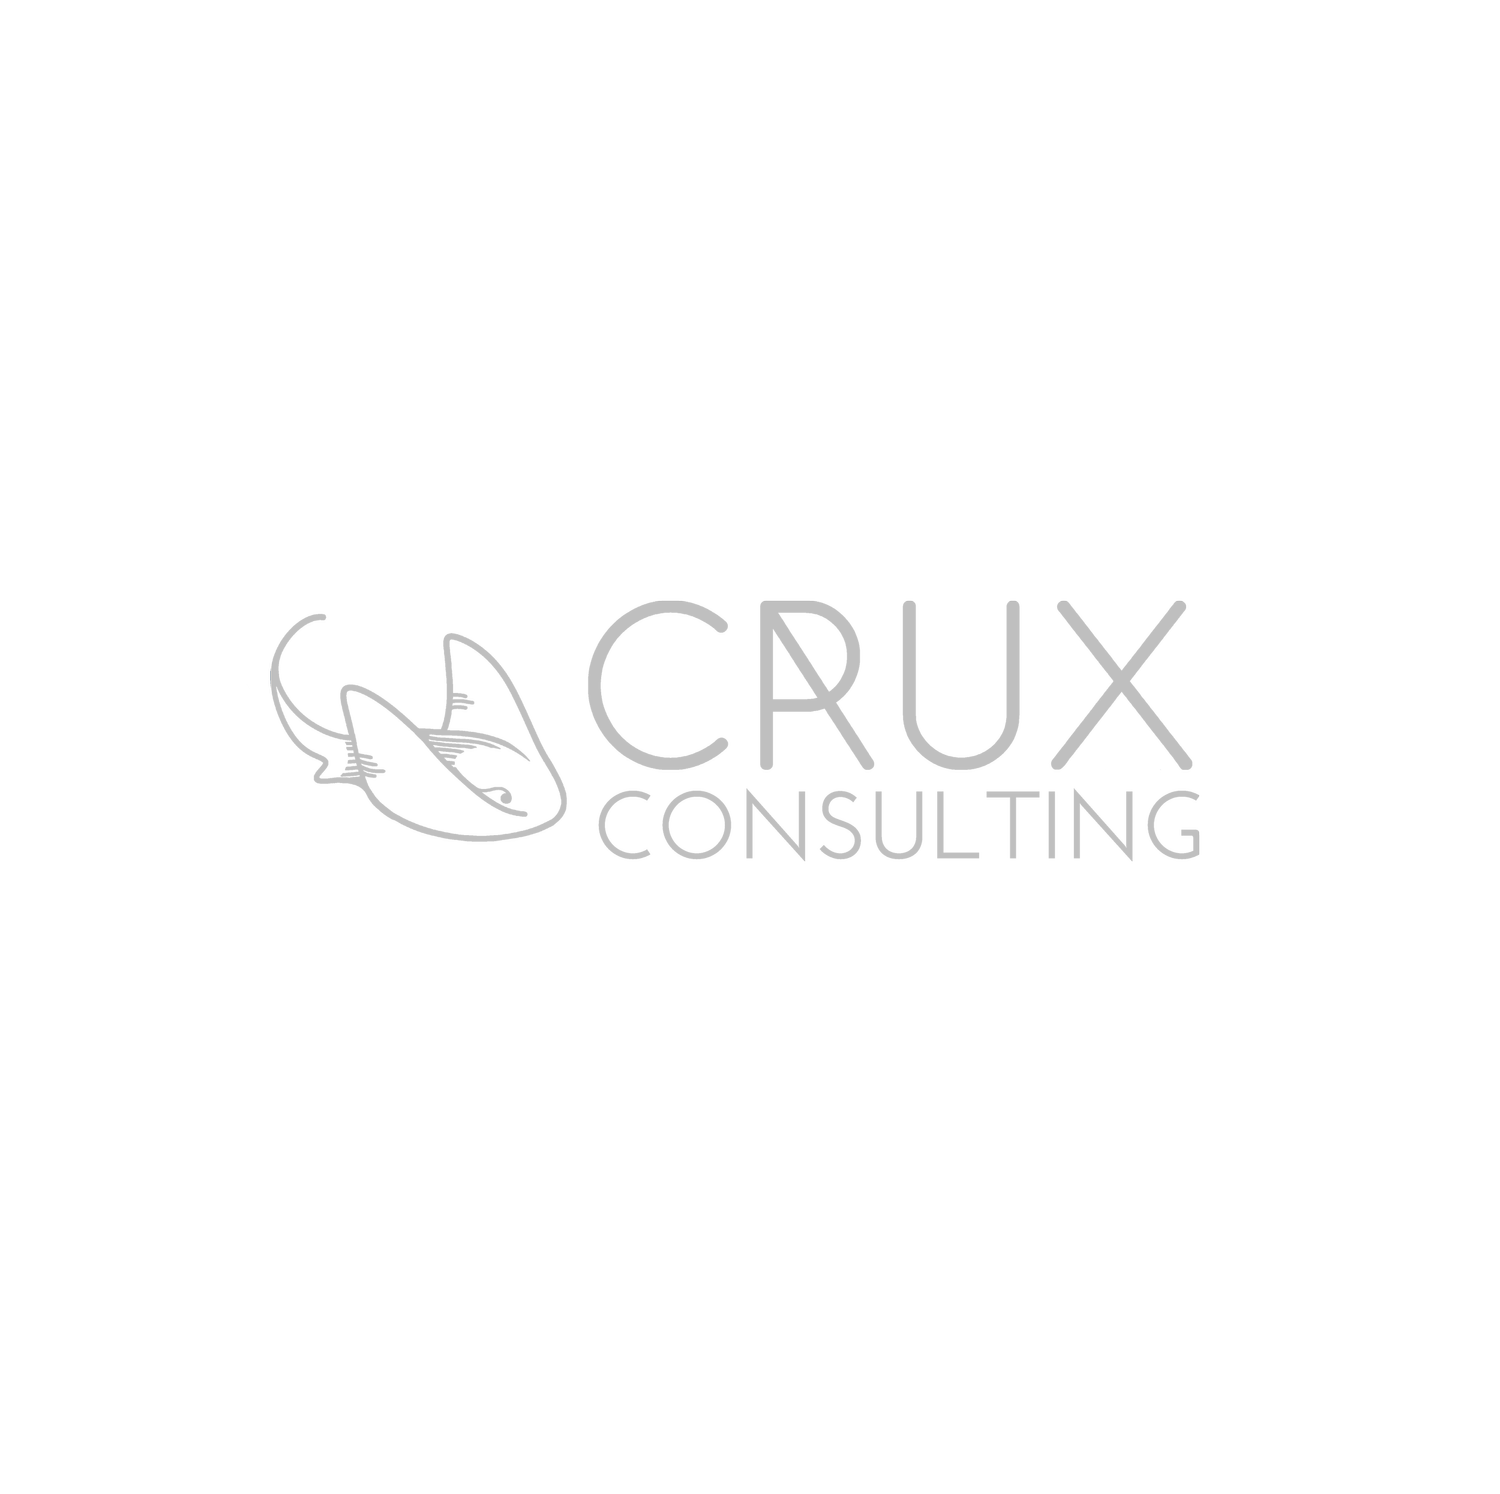 Crux Consulting - Business Development Consultancy